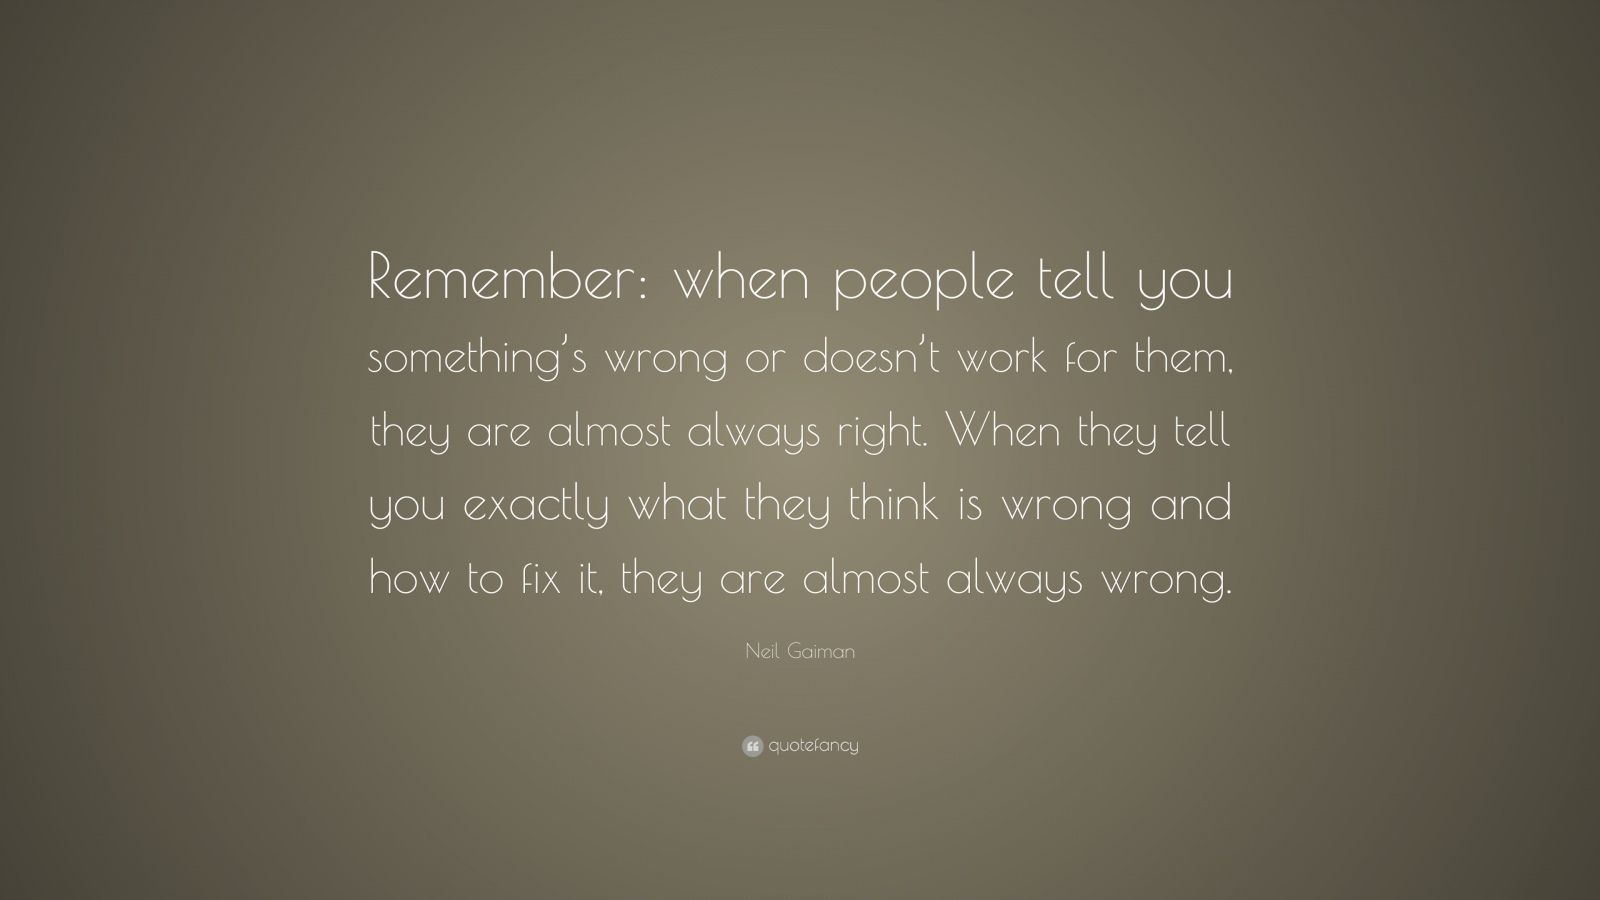 Neil Gaiman Quote: “Remember: when people tell you something’s wrong or